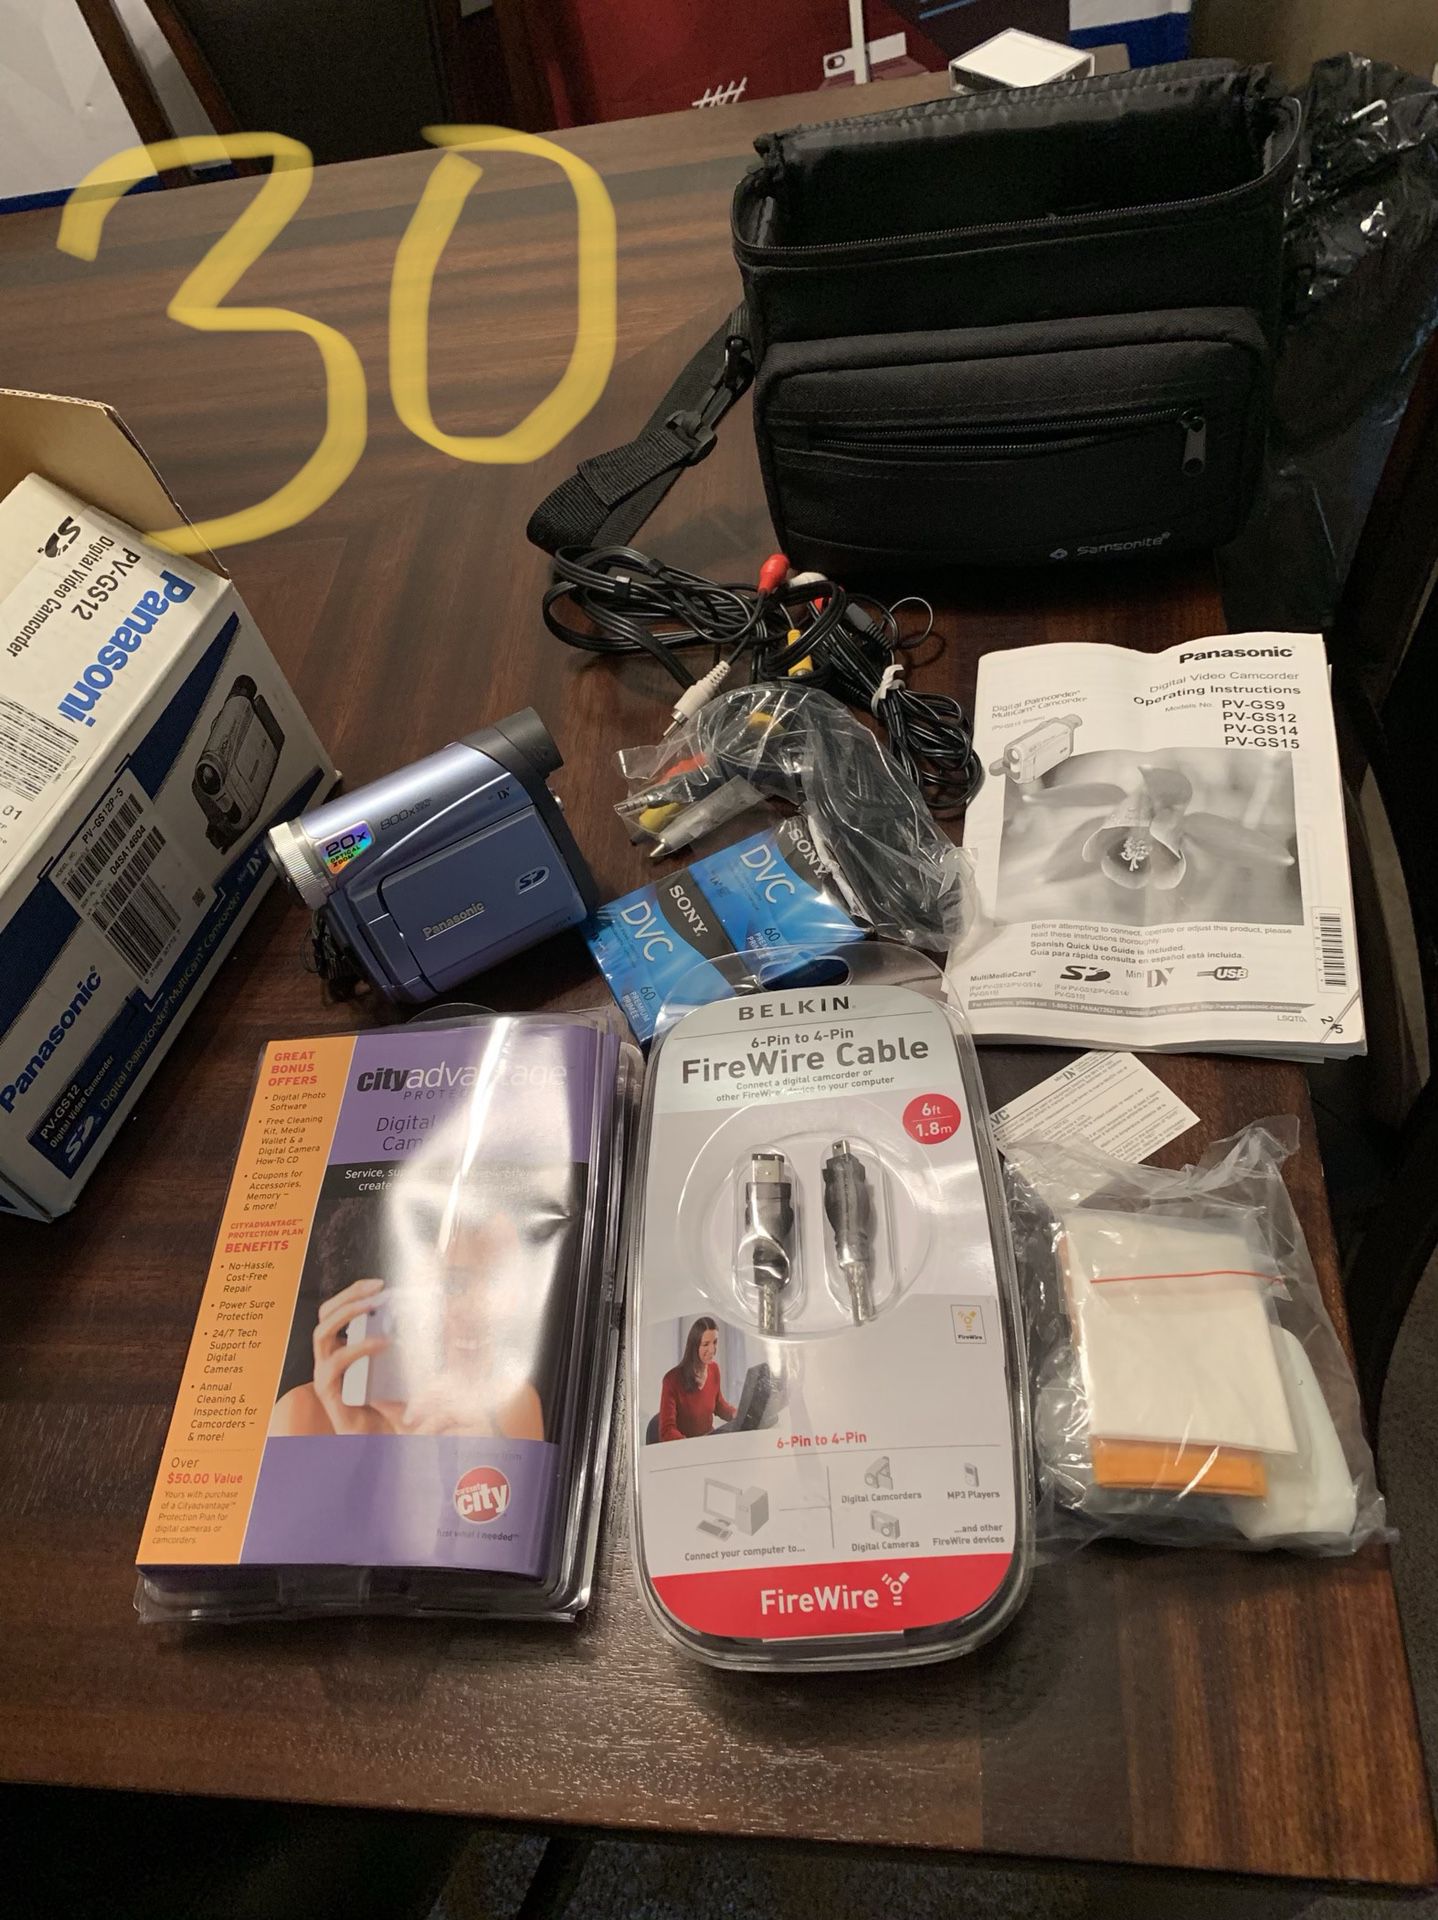 Panasonic Camcorder and accessories